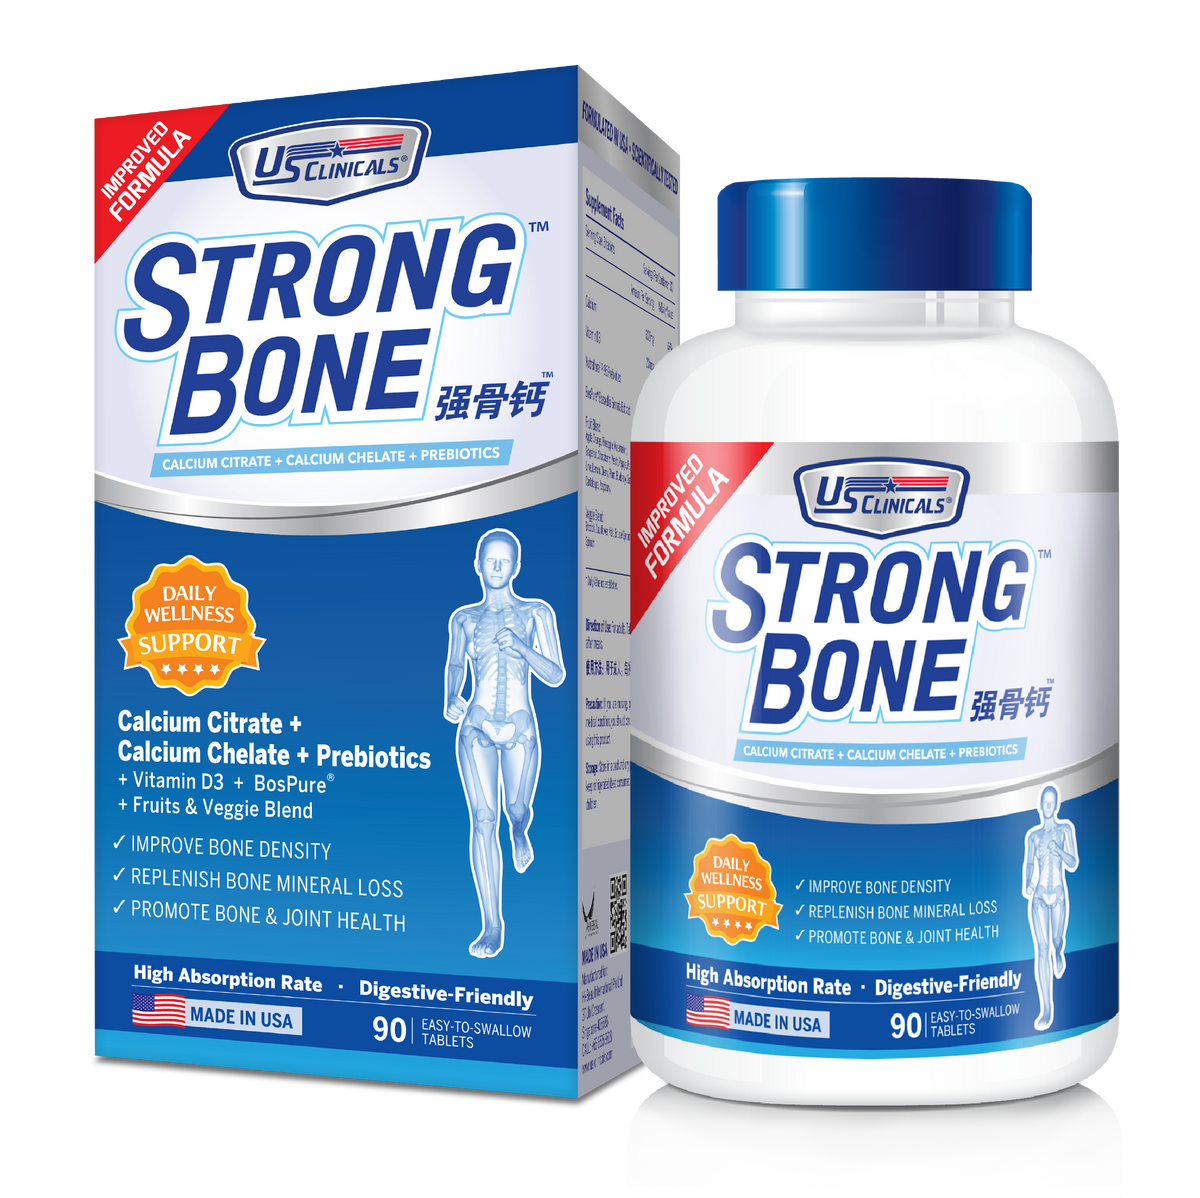 Singapore's No.1 Joint Supplement, StrongJoint™ contains contains Collagen Type II, which is 342% more effective than glucosamine alone. It helps to relieve 6 major joint problems in 7 days.